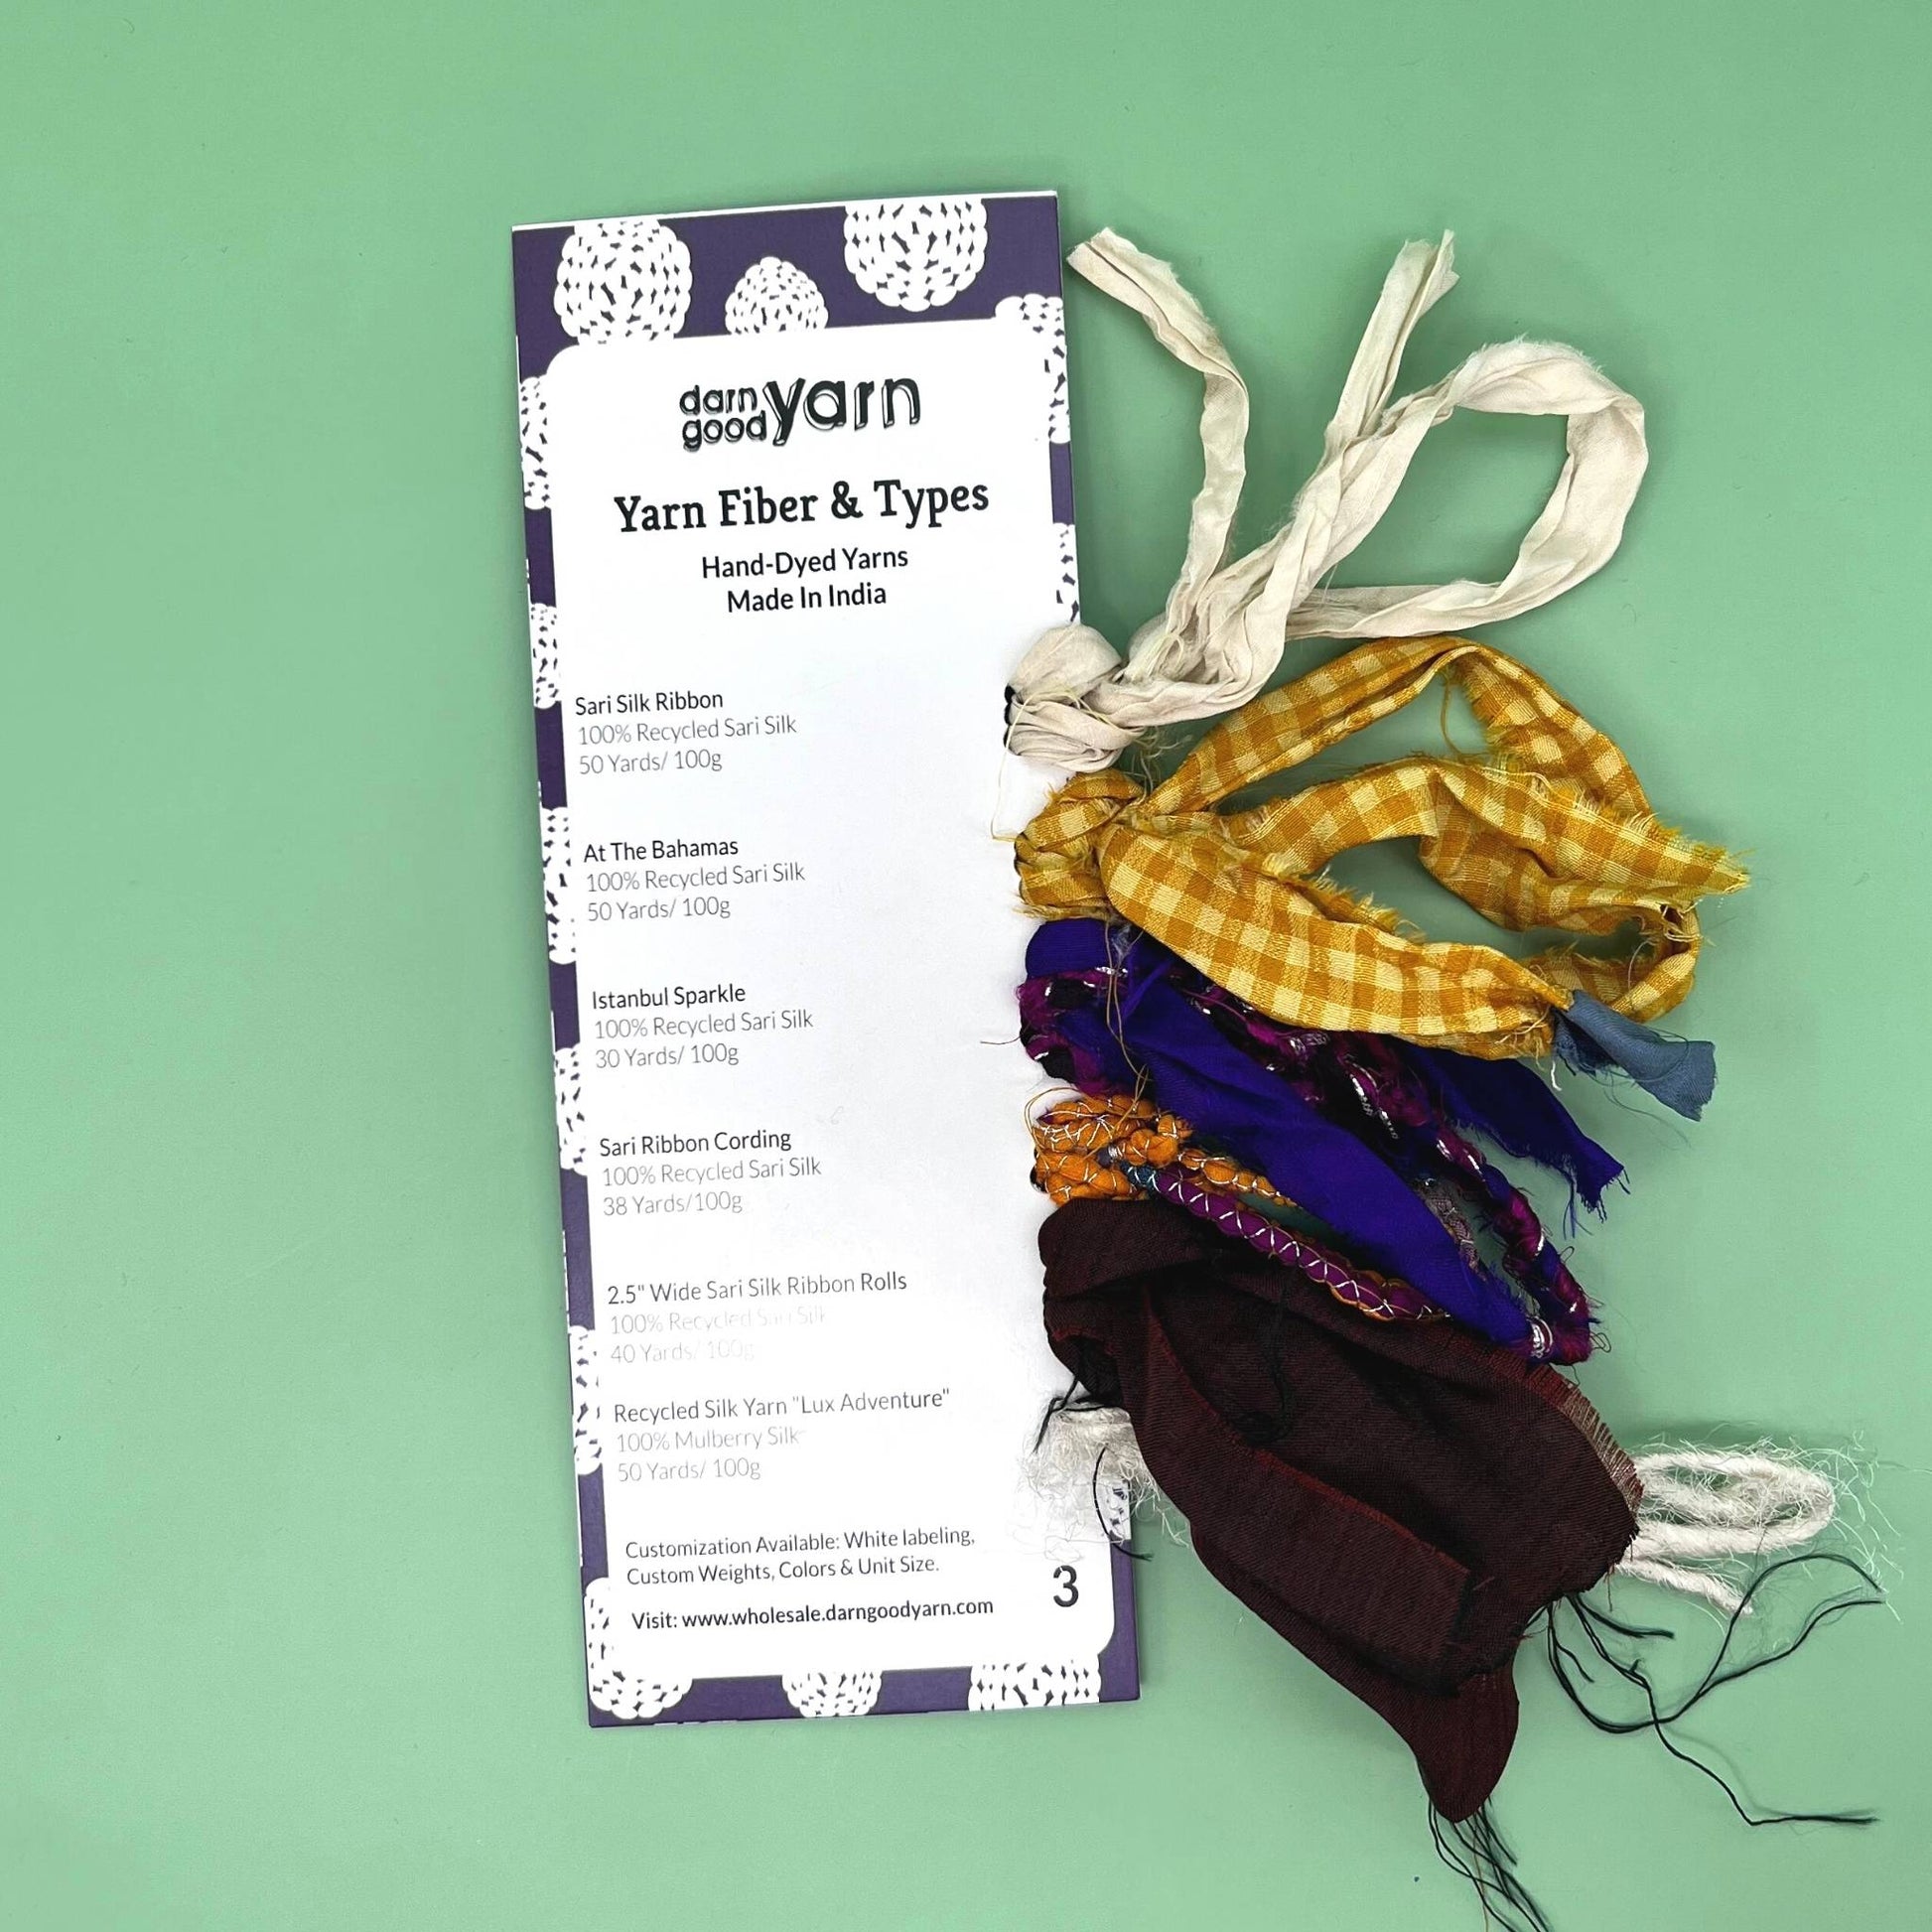 Yarn fiber and type sample cards on a green backdrop. 